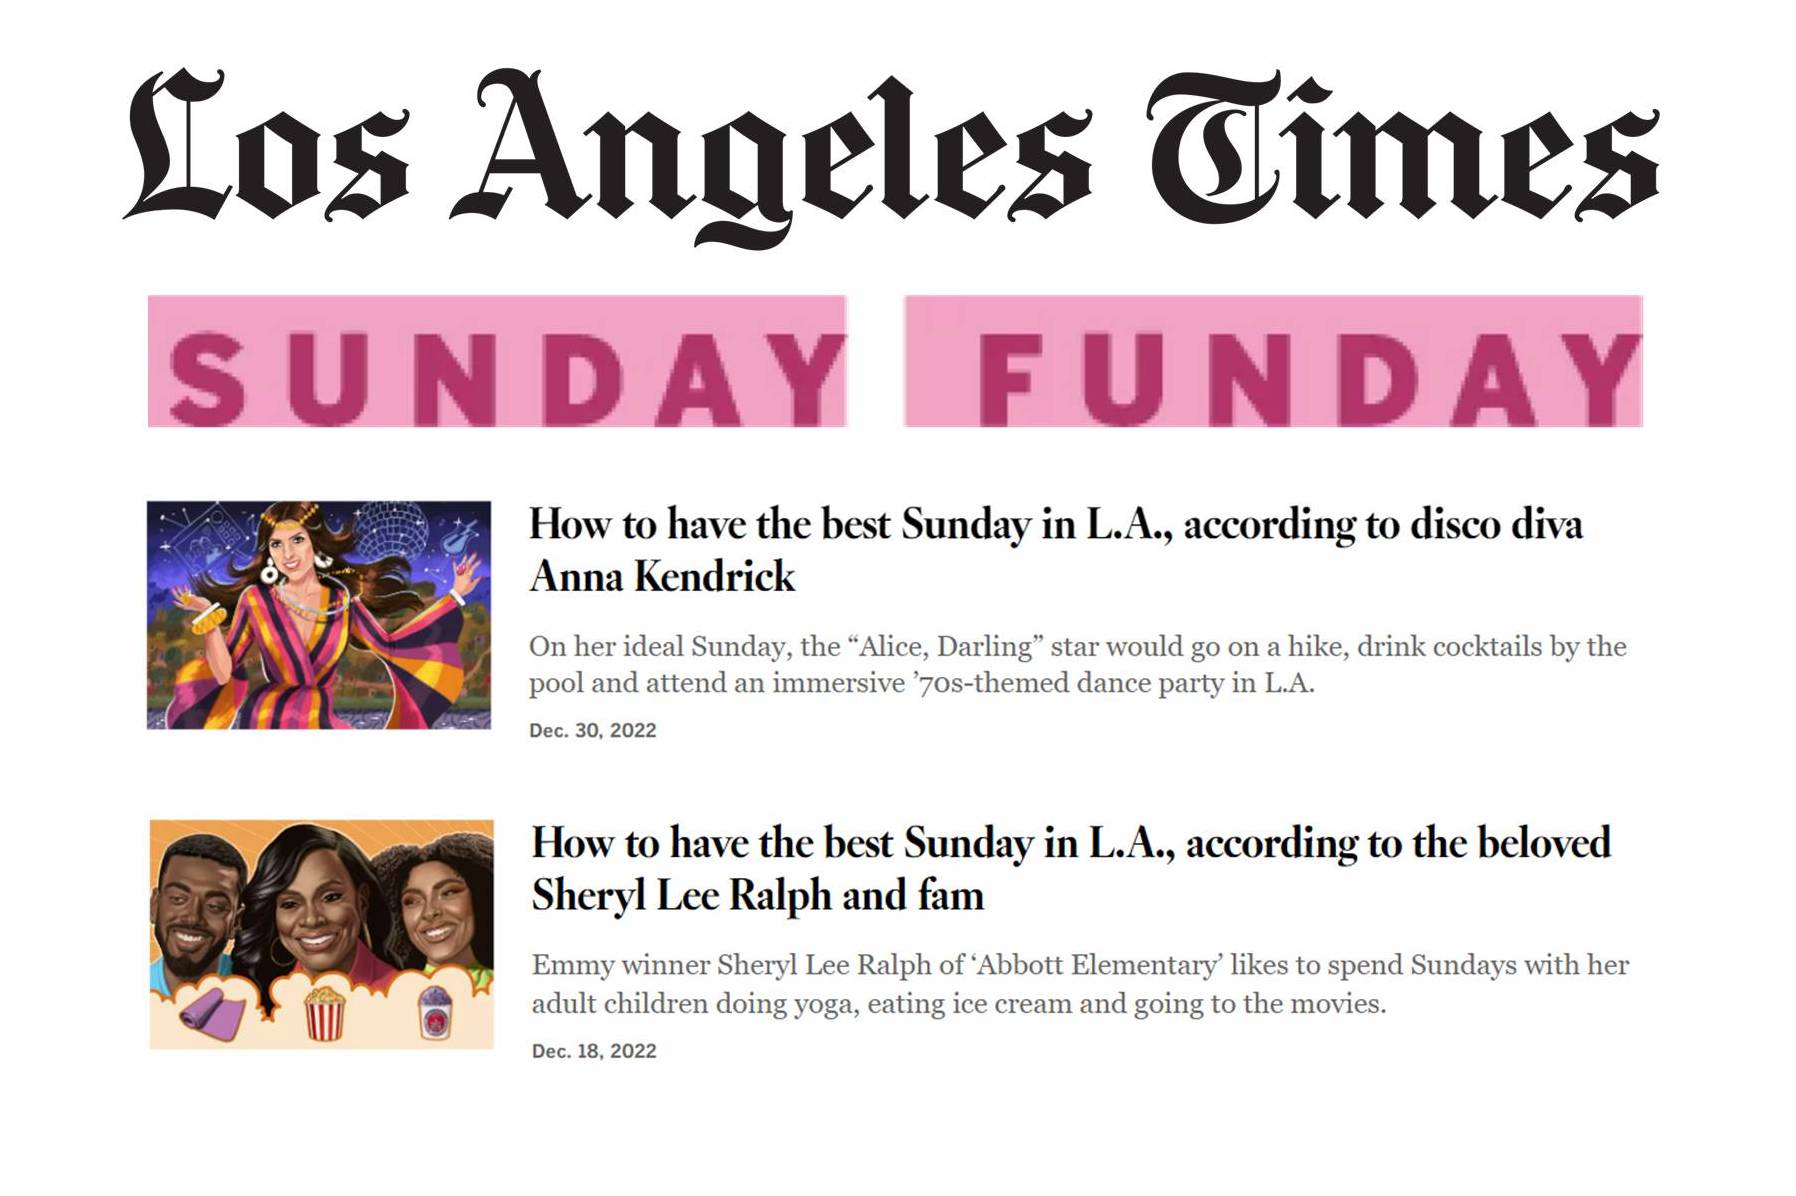 The Los Angeles Times Newspaper Launches a “Sunday Funday” Section in